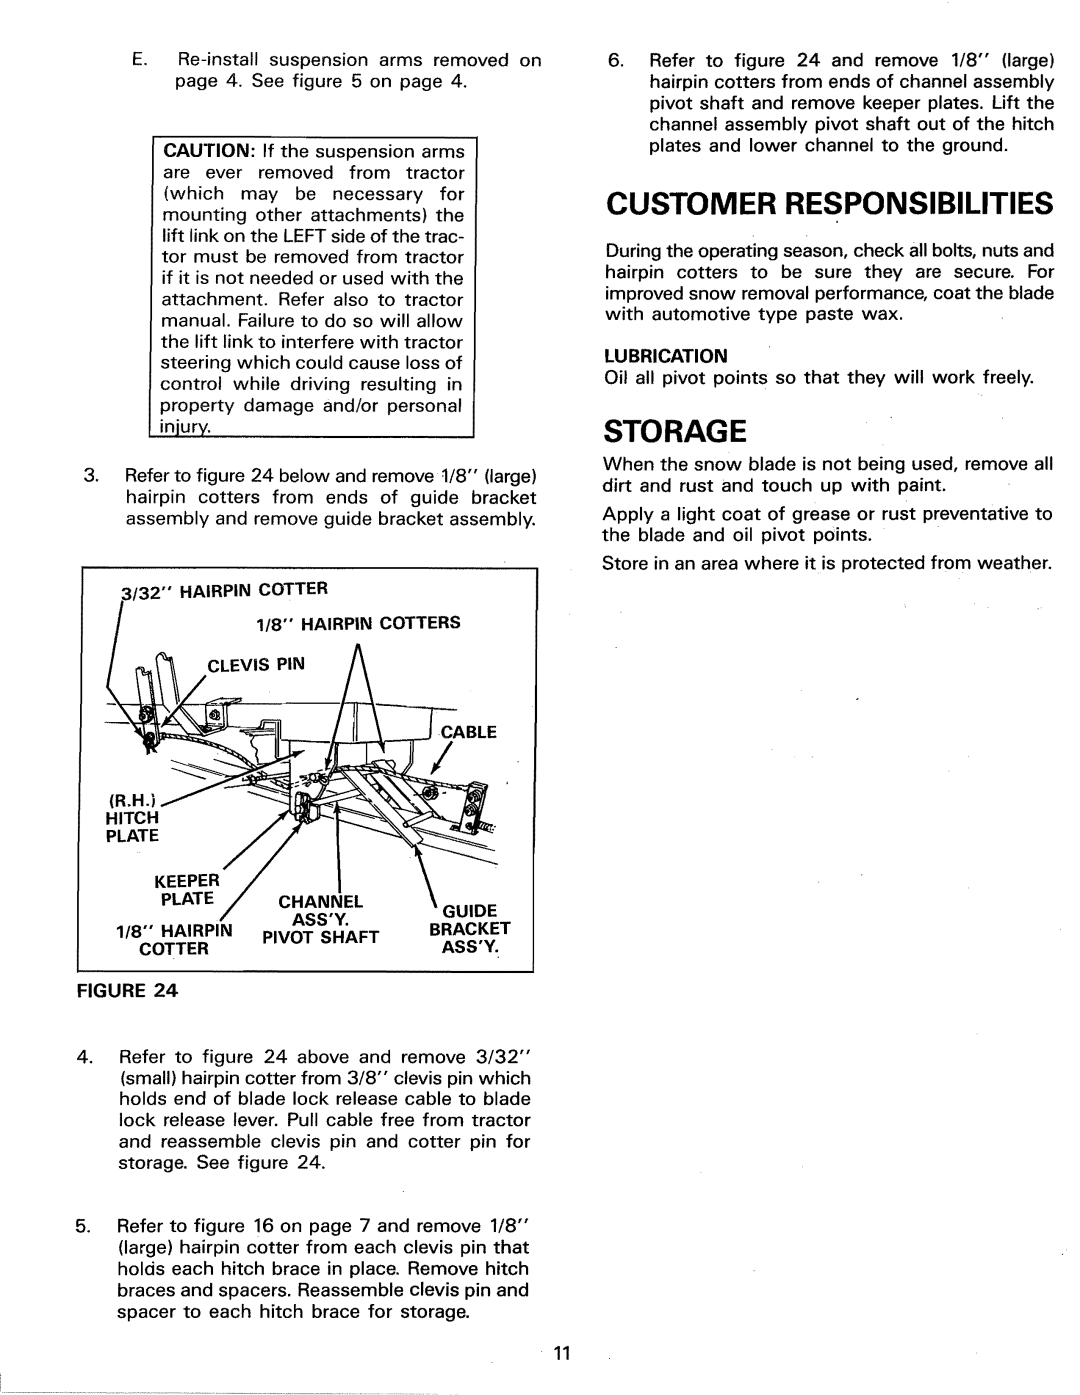 Sears 486.244062 owner manual Customer Responsibilities, Storage, r32 HAIRPIN COTTER 1/8 HAIRPIN COTTERS CLEVIS PIN 